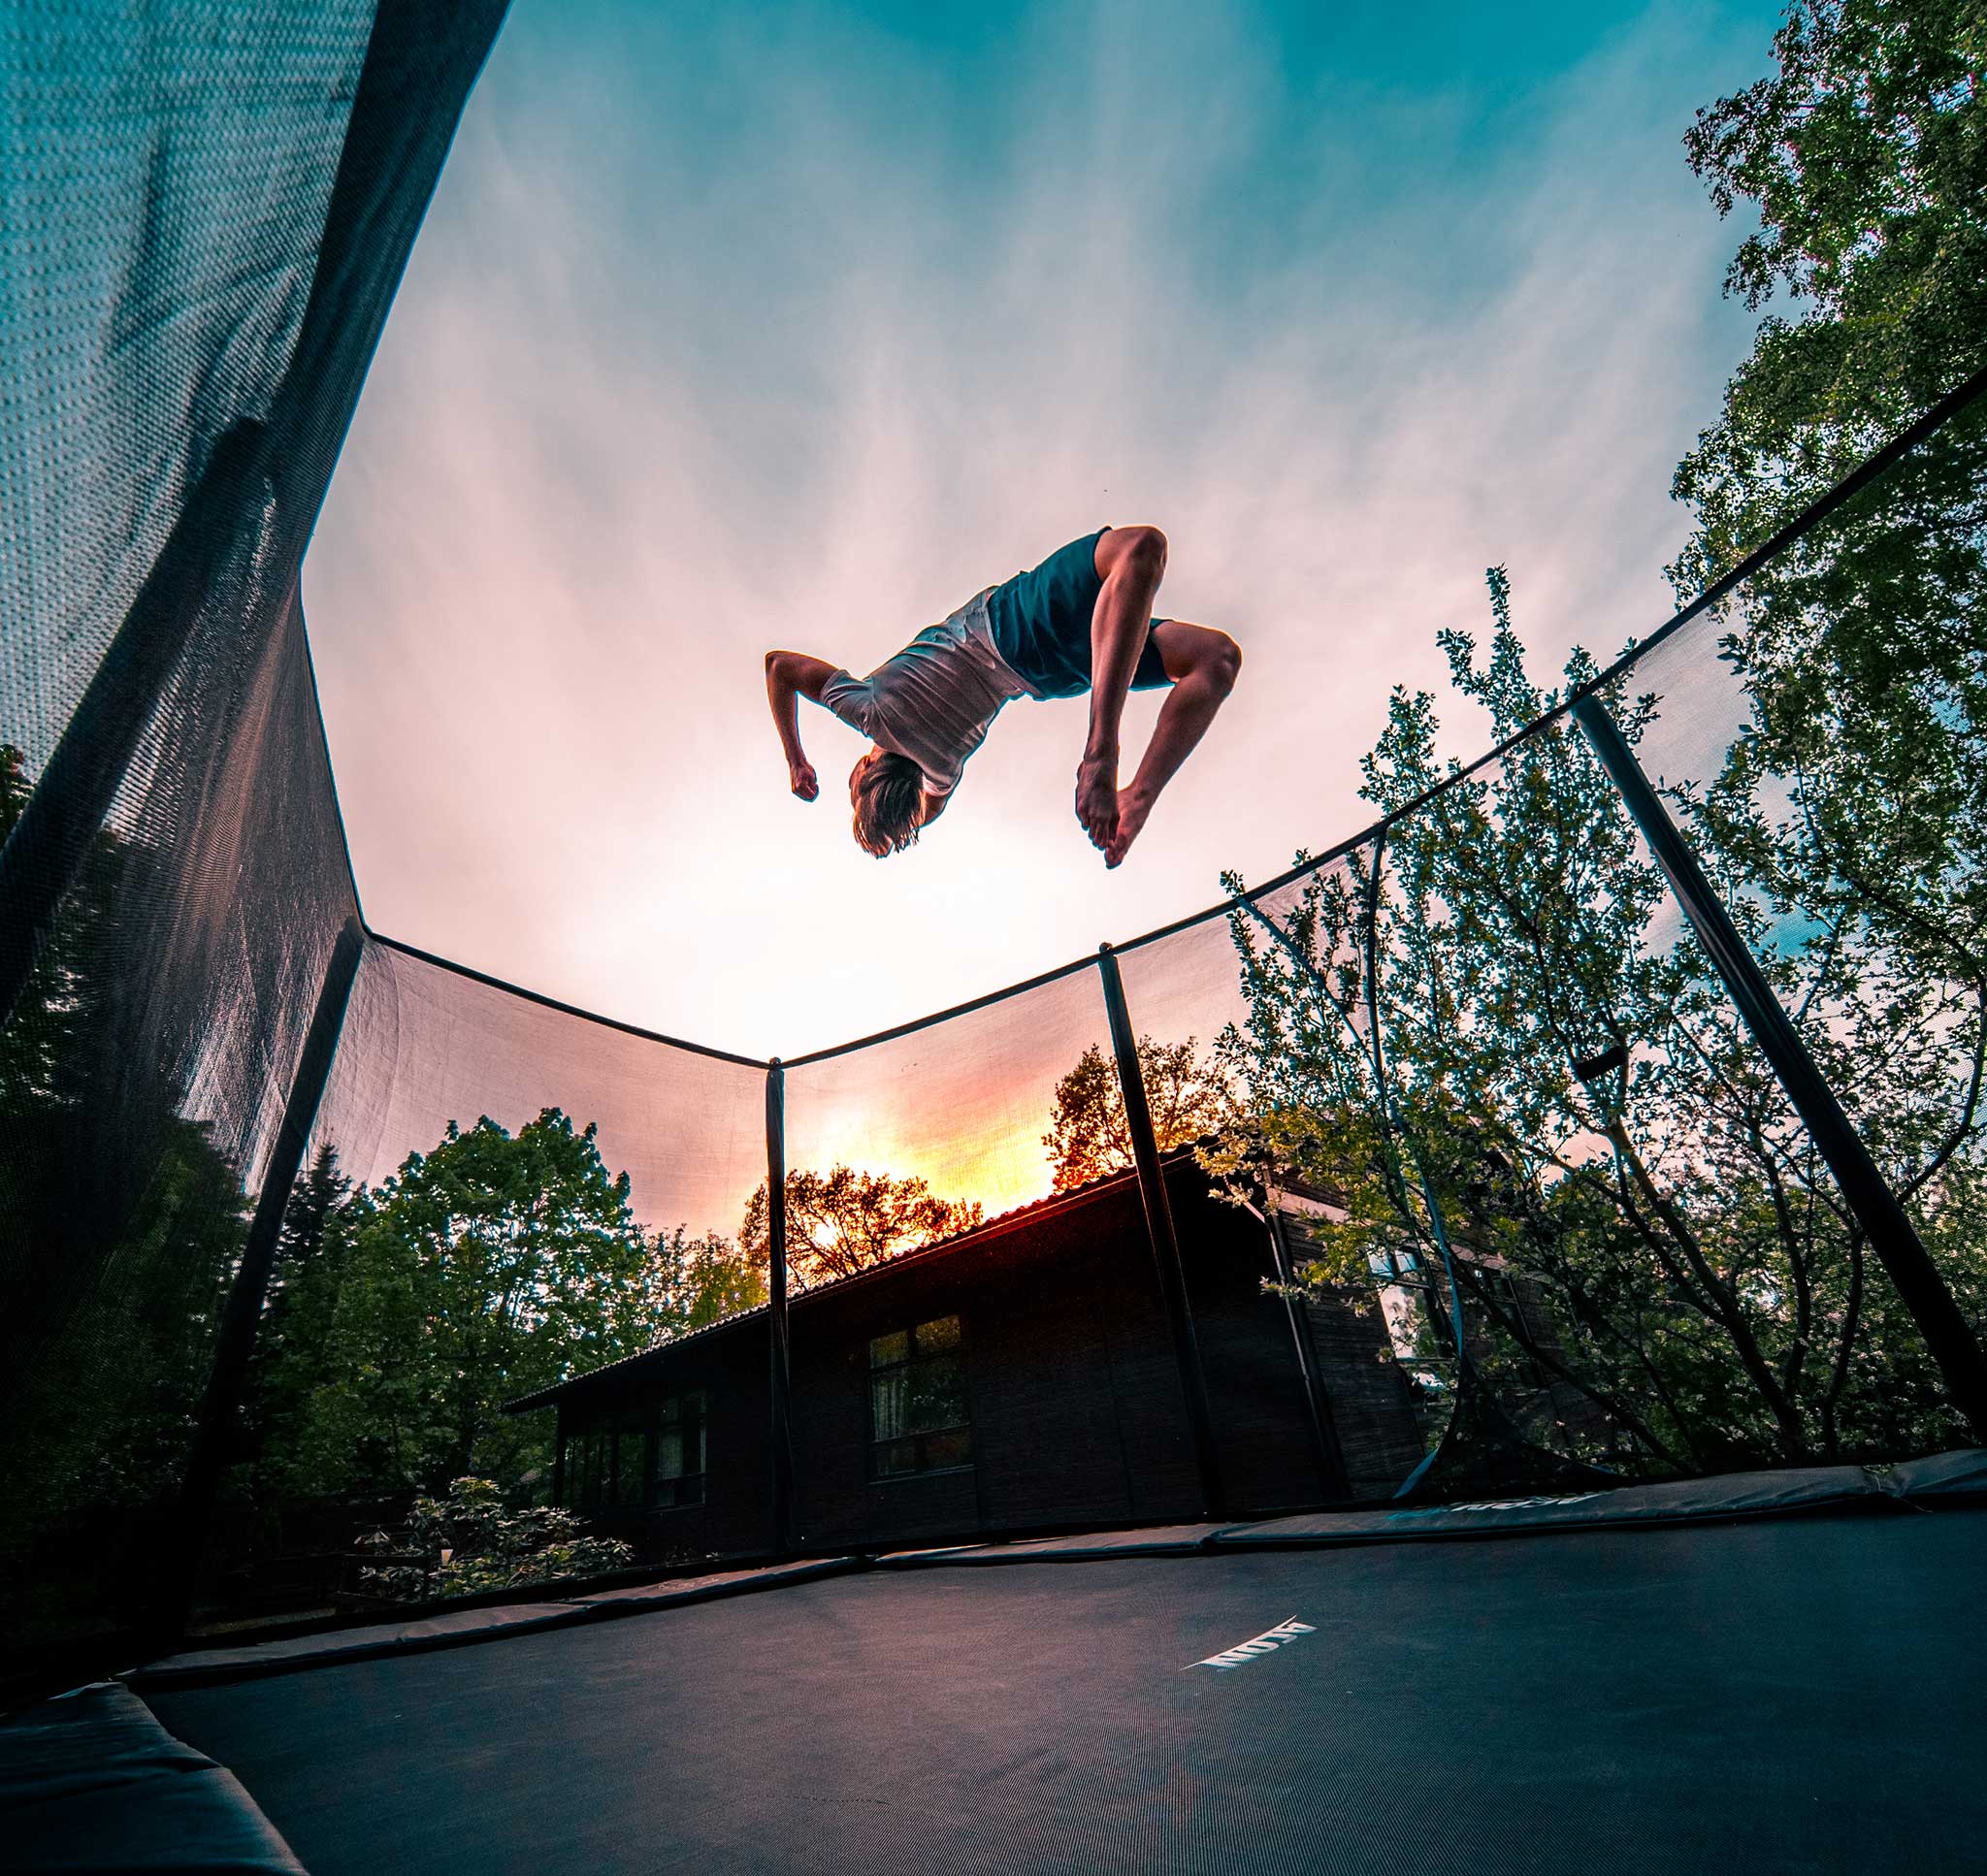 How to a backflip on a trampoline – Tips for – Acon EU